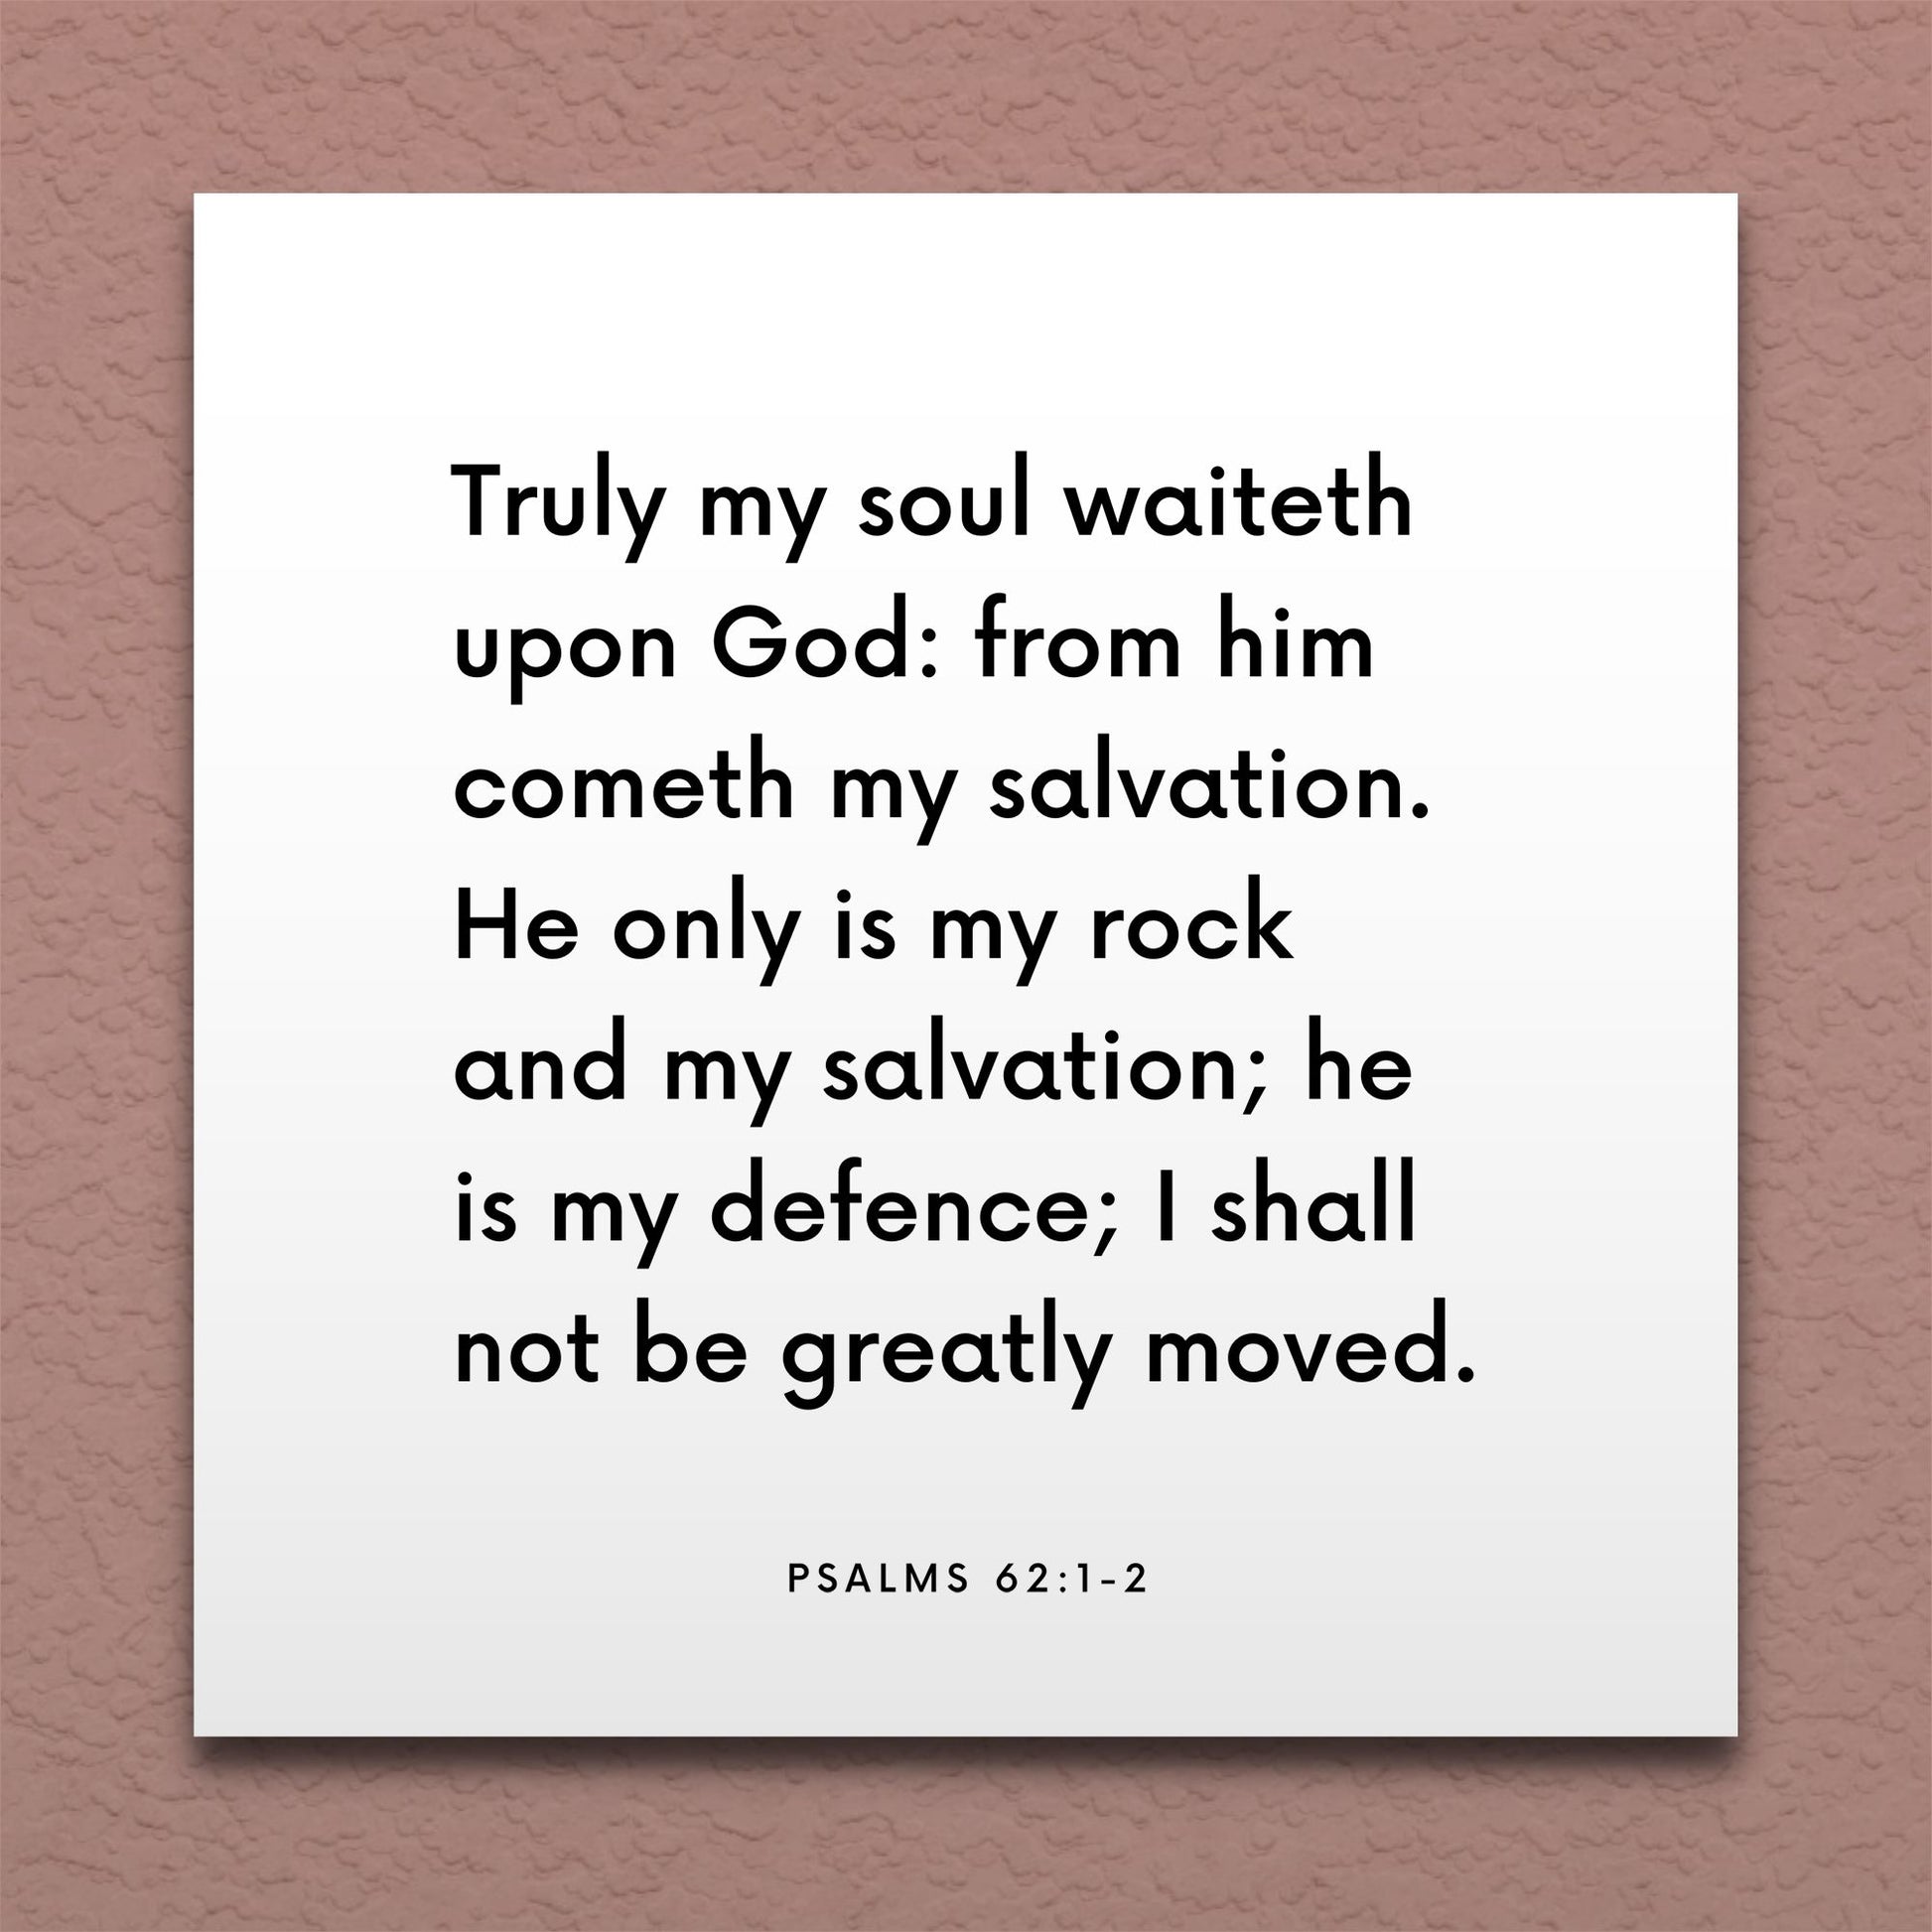 Wall-mounted scripture tile for Psalms 62:1-2 - "Truly my soul waiteth upon God"